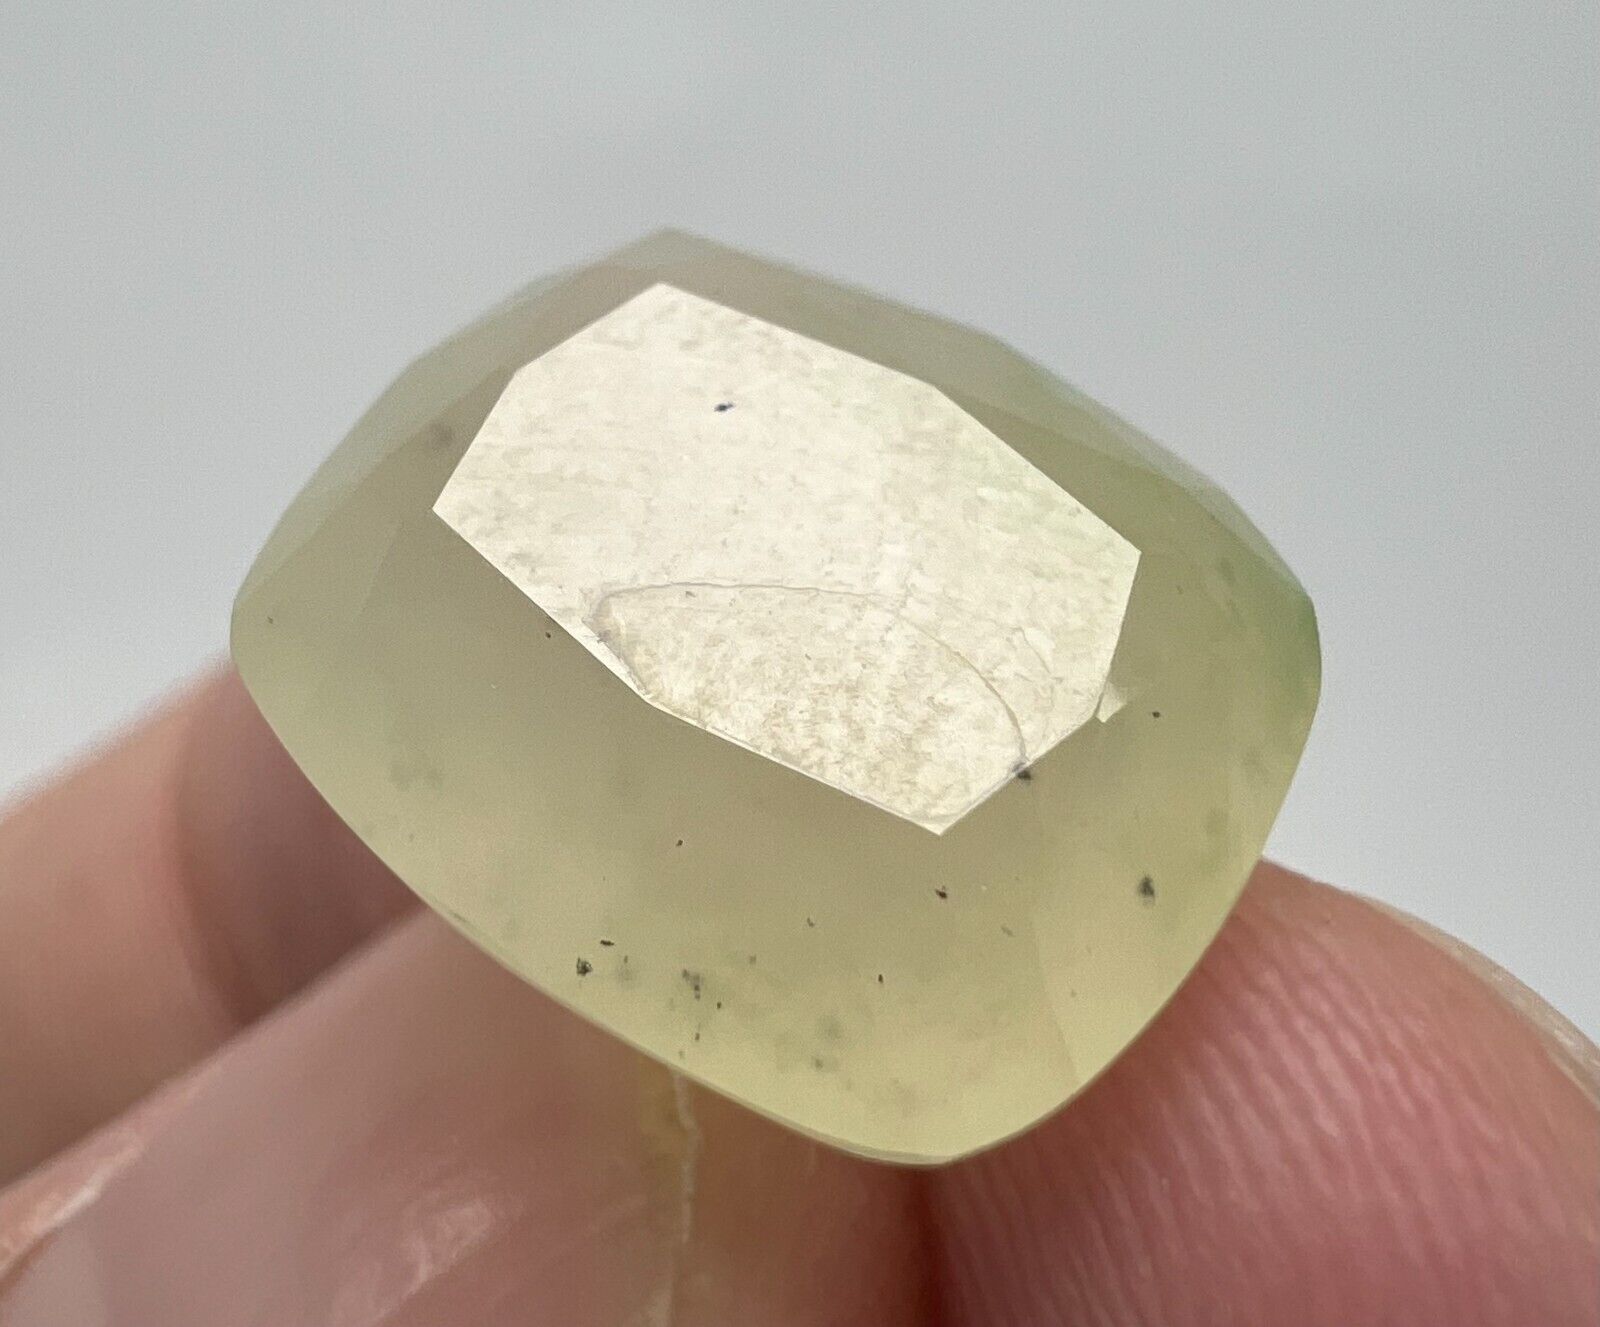 13.10 CT. Ultra Rare White Grossular Garnet with Green Dot Inclusion @Mohmand